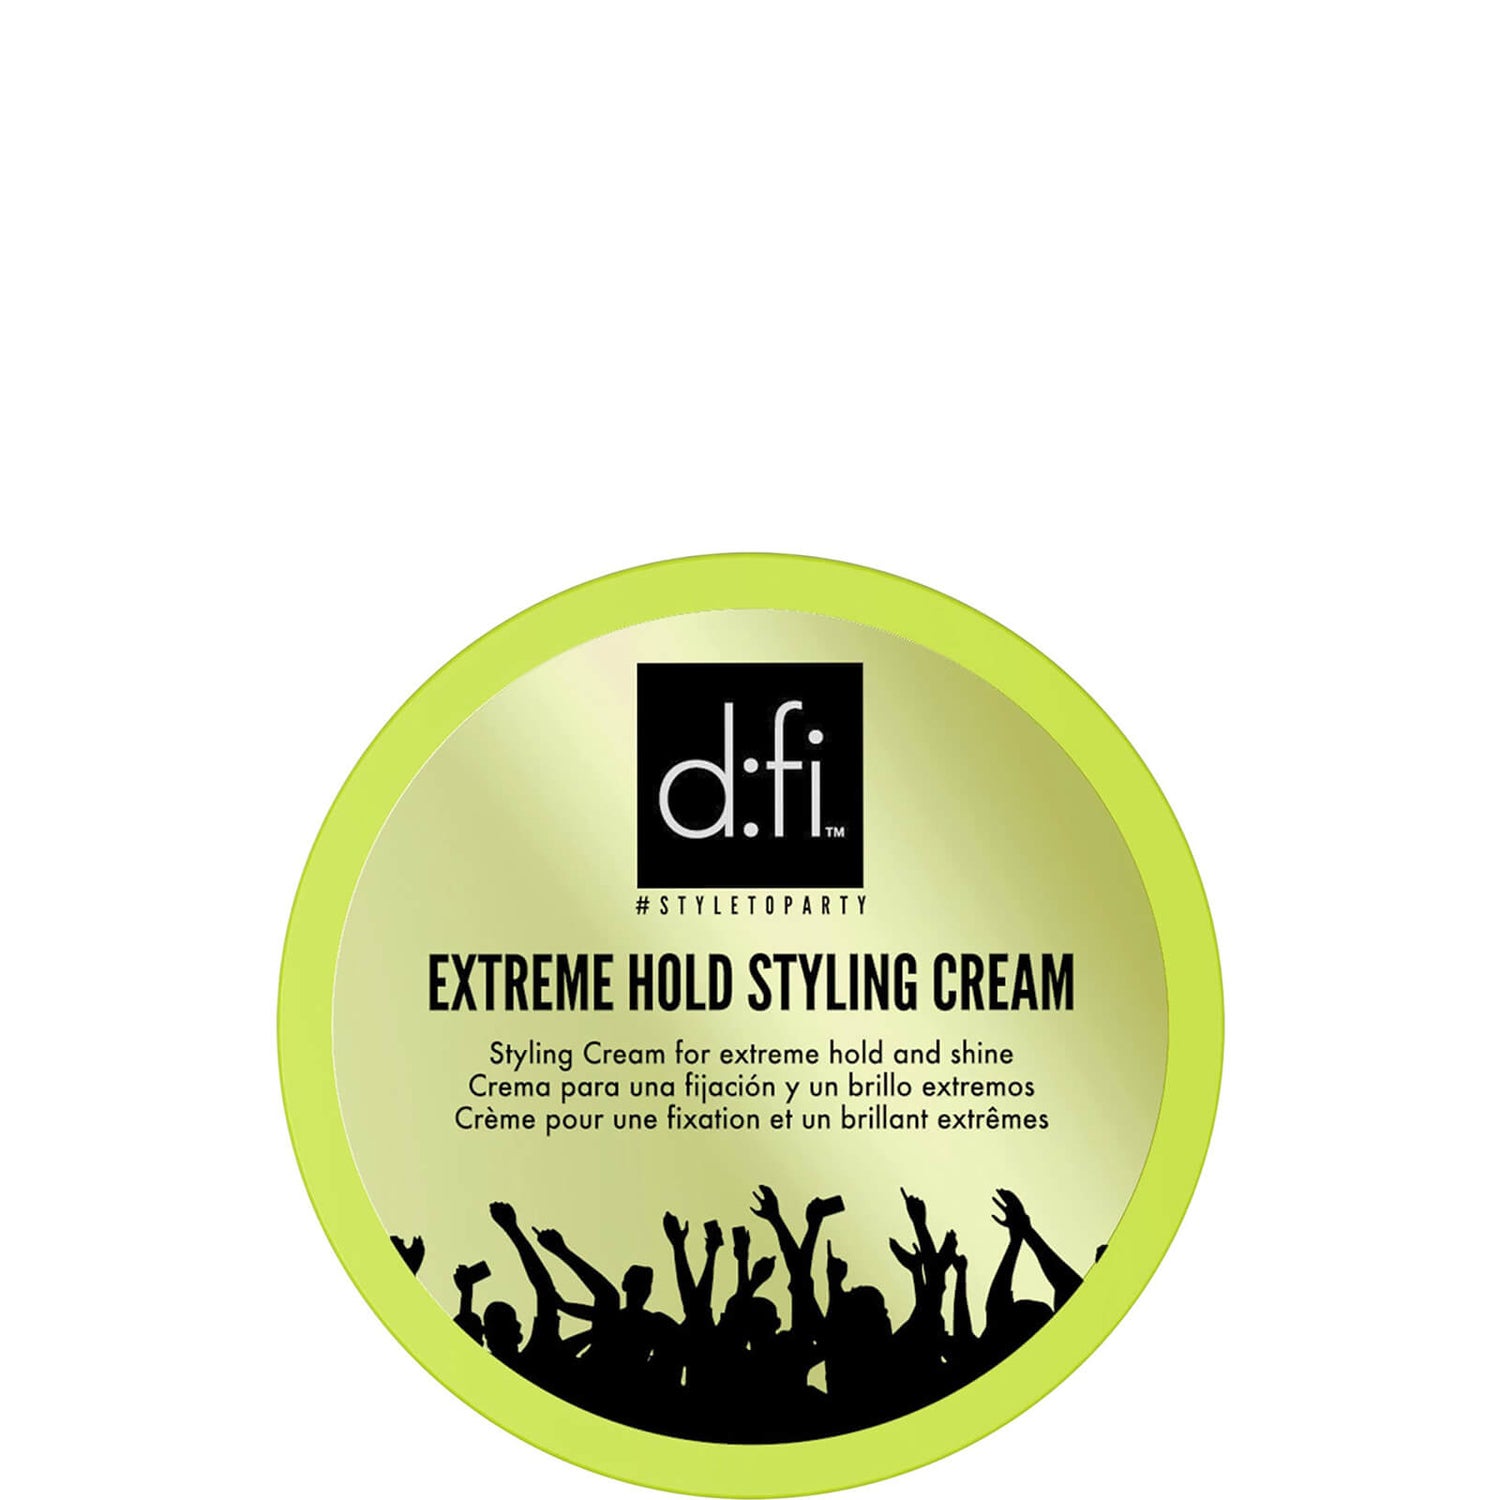 Crema Extreme Hold Styling de d:fi, 75 g